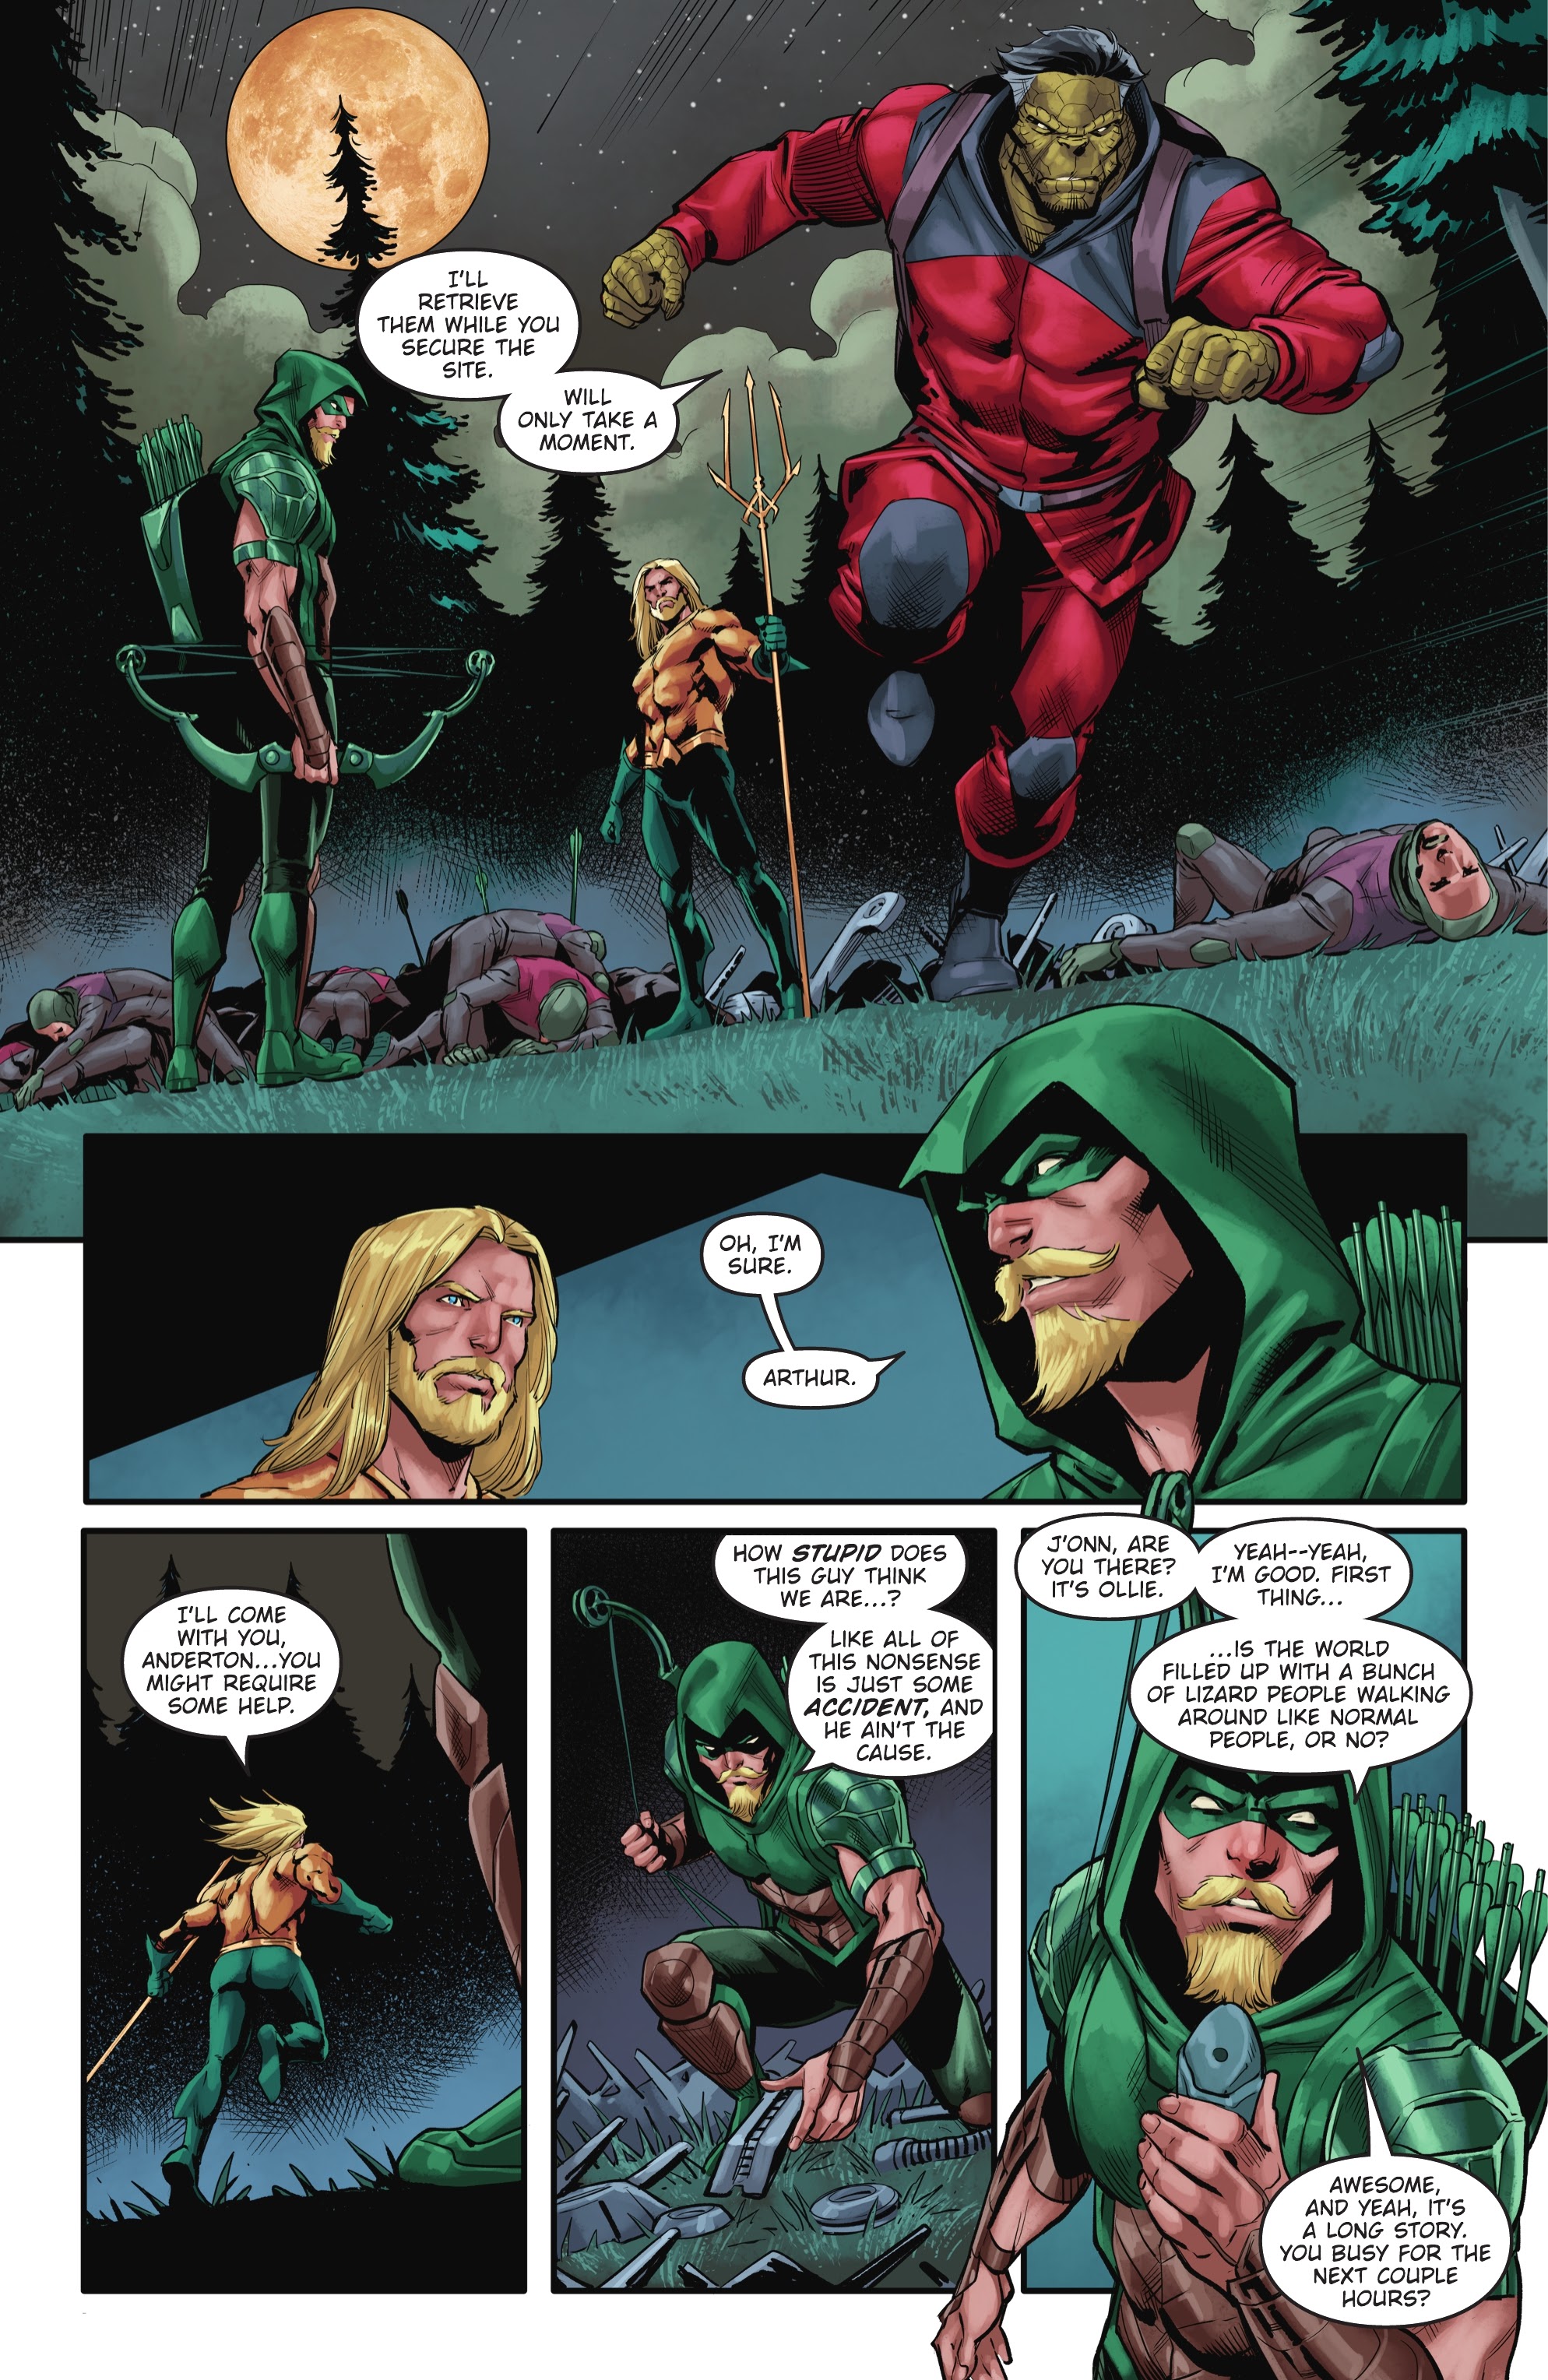 Aquaman Green Arrow Deep Target Issue 6 | Read Aquaman Green Arrow Deep  Target Issue 6 comic online in high quality. Read Full Comic online for  free - Read comics online in high quality .